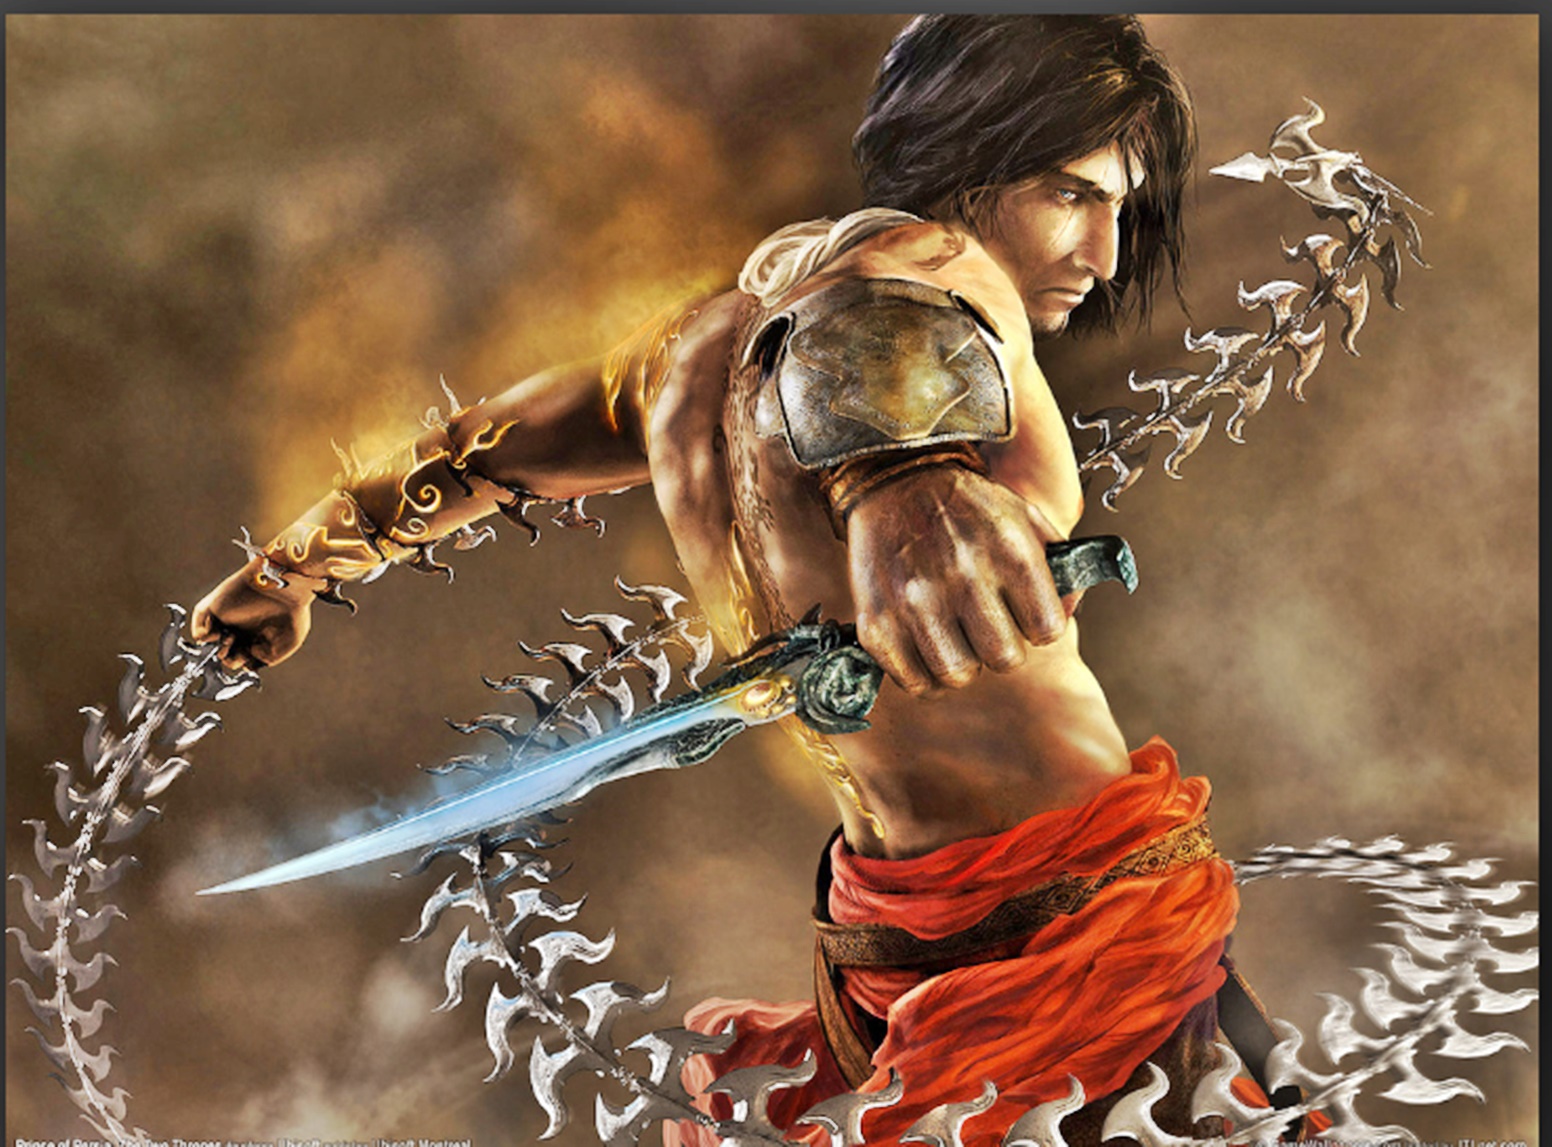 prince of persia the two thrones pc crack free download